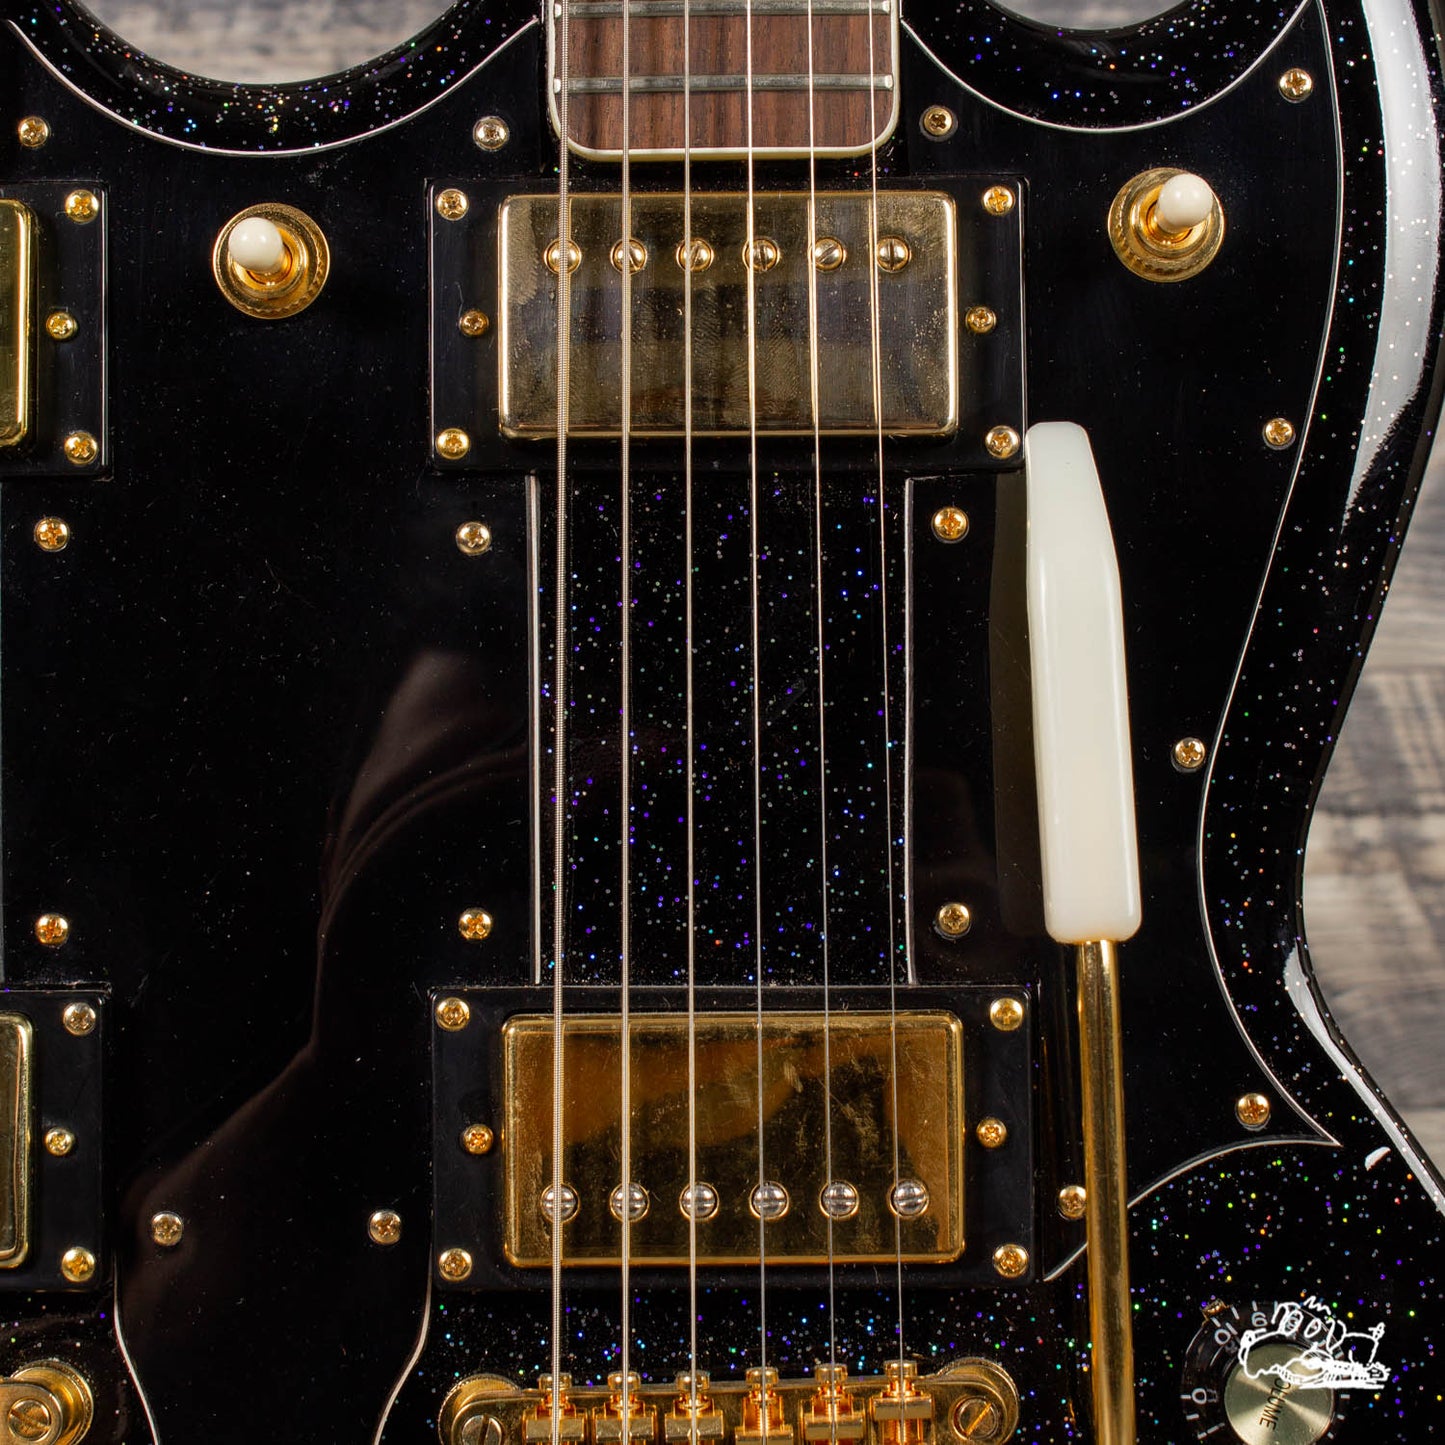 Bell & Hern Double Neck SG-Style - "Black Galaxy" Sparkle